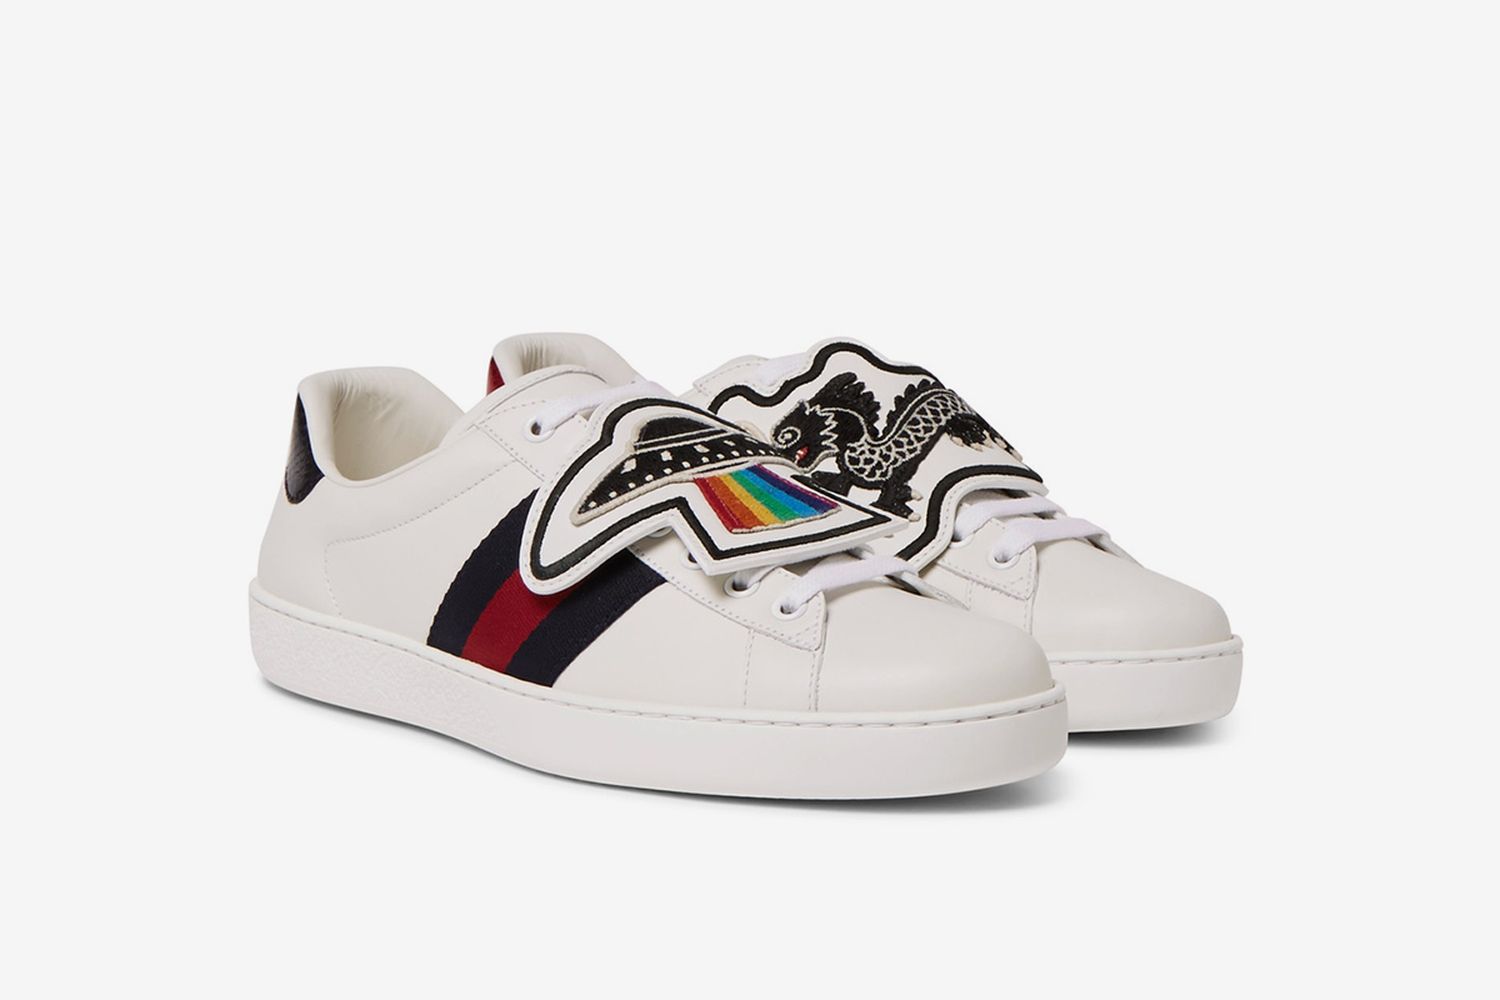 Here Are 8 Gucci Ace Sneakers to Shop for the Flex